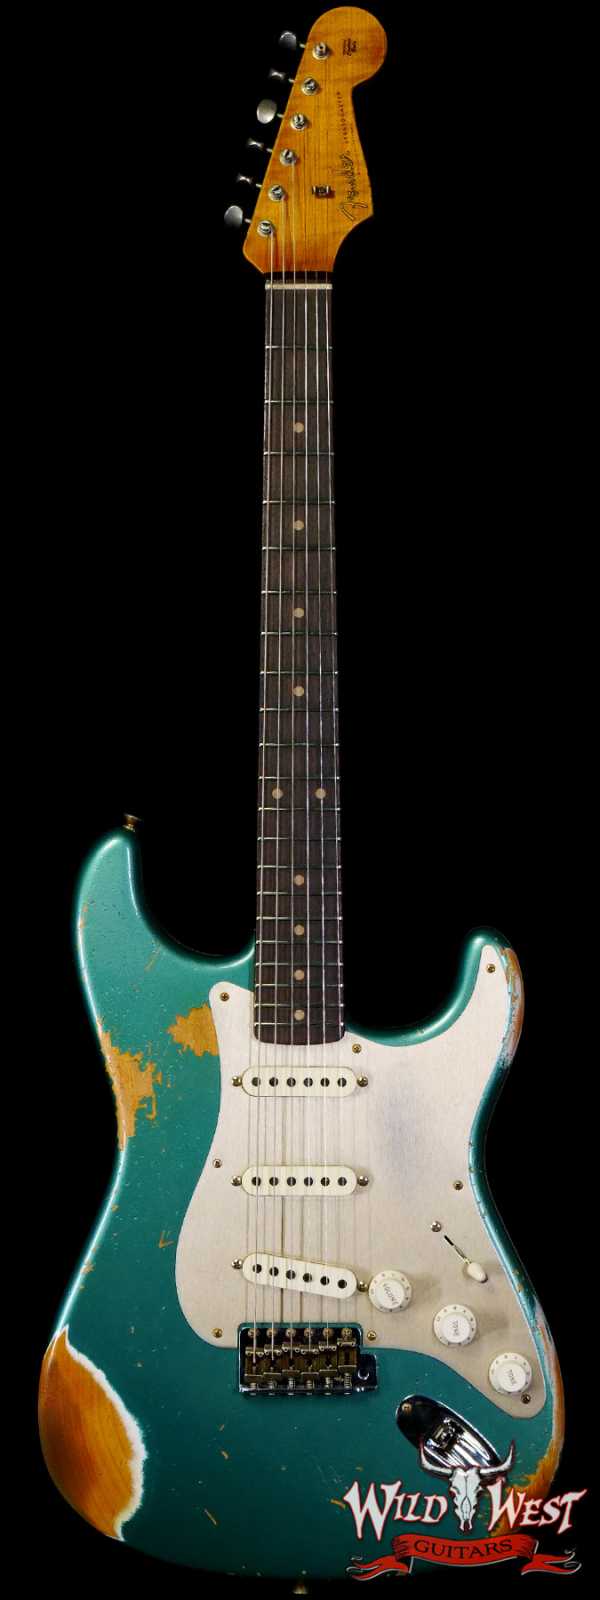 Fender Custom Shop Limited Edition 1959 59’ Roasted Stratocaster Heavy Relic Aged Sherwood Green Metallic